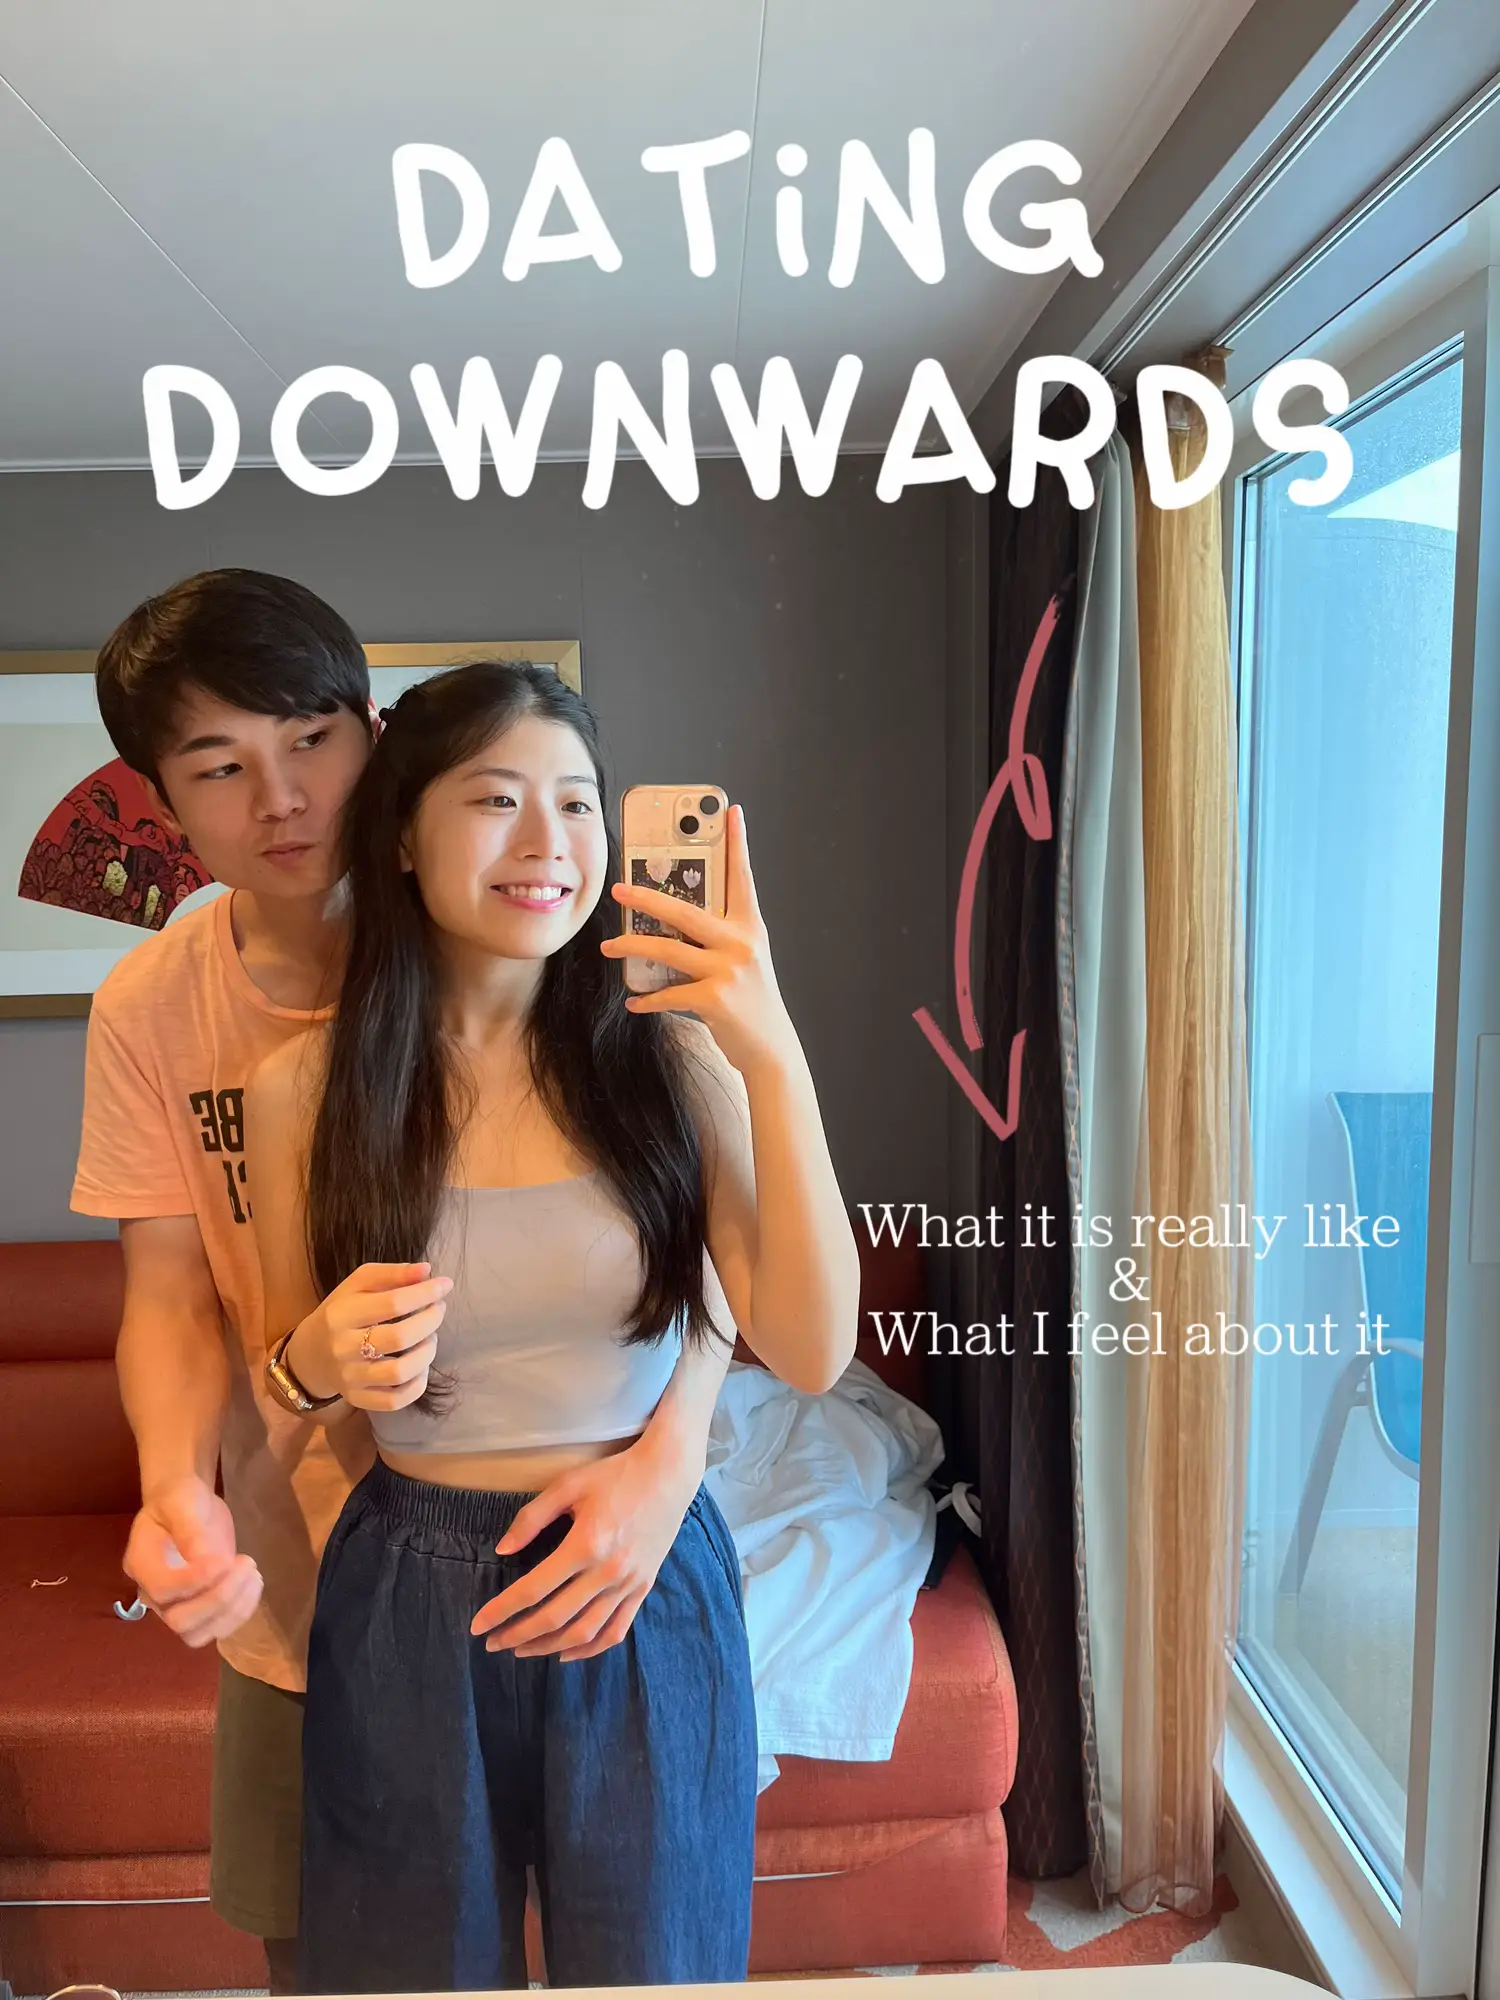 Dating Downwards, what it is really like's images(0)